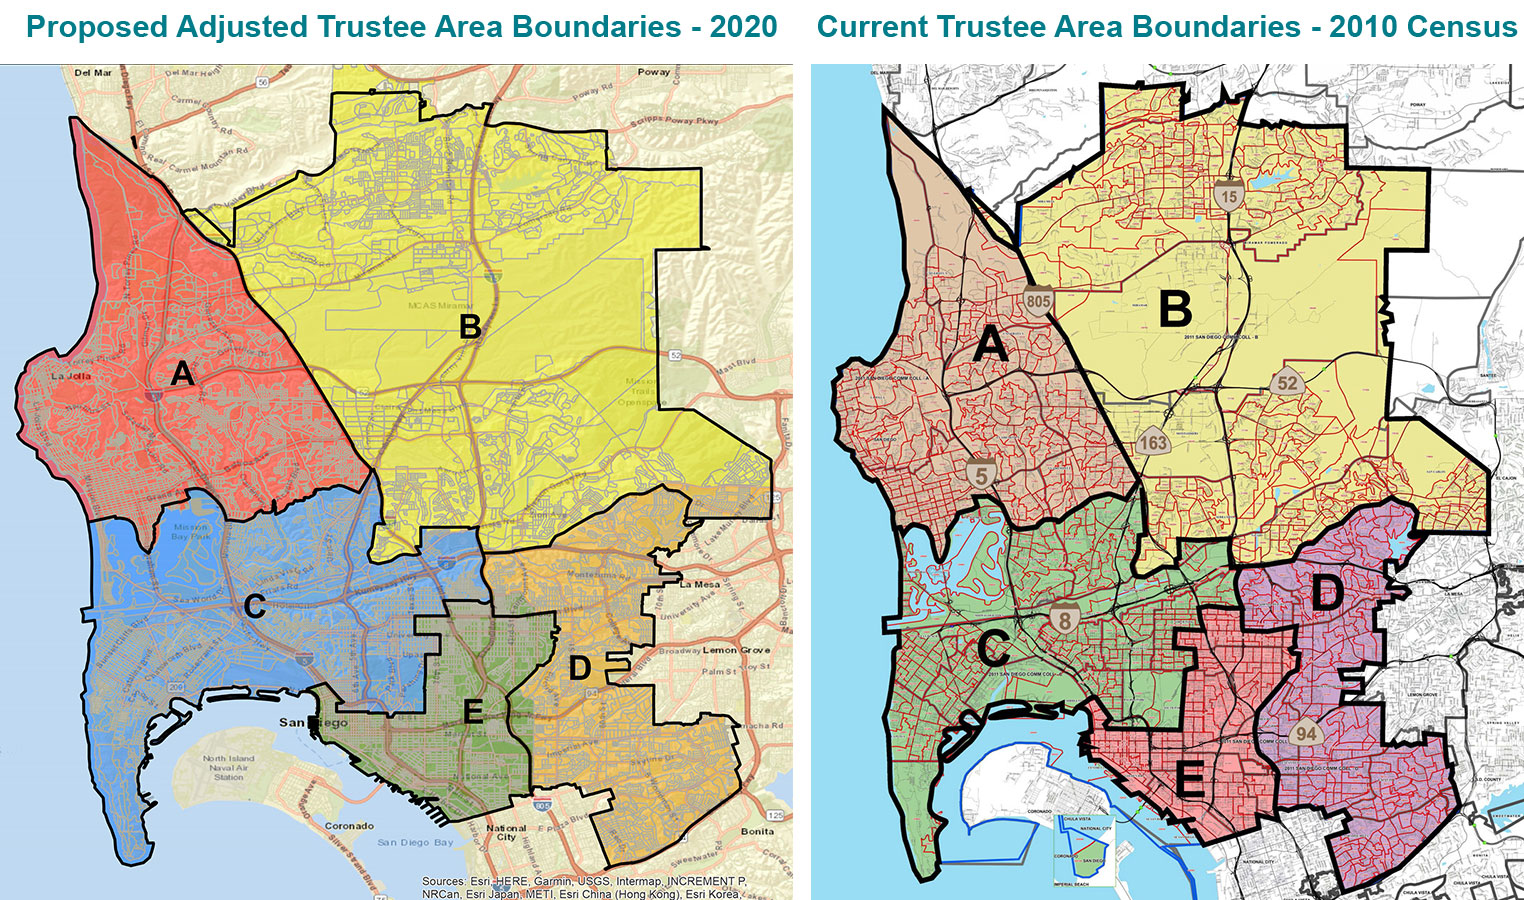 Redistricting map compares boundaries for 2010 to 2020